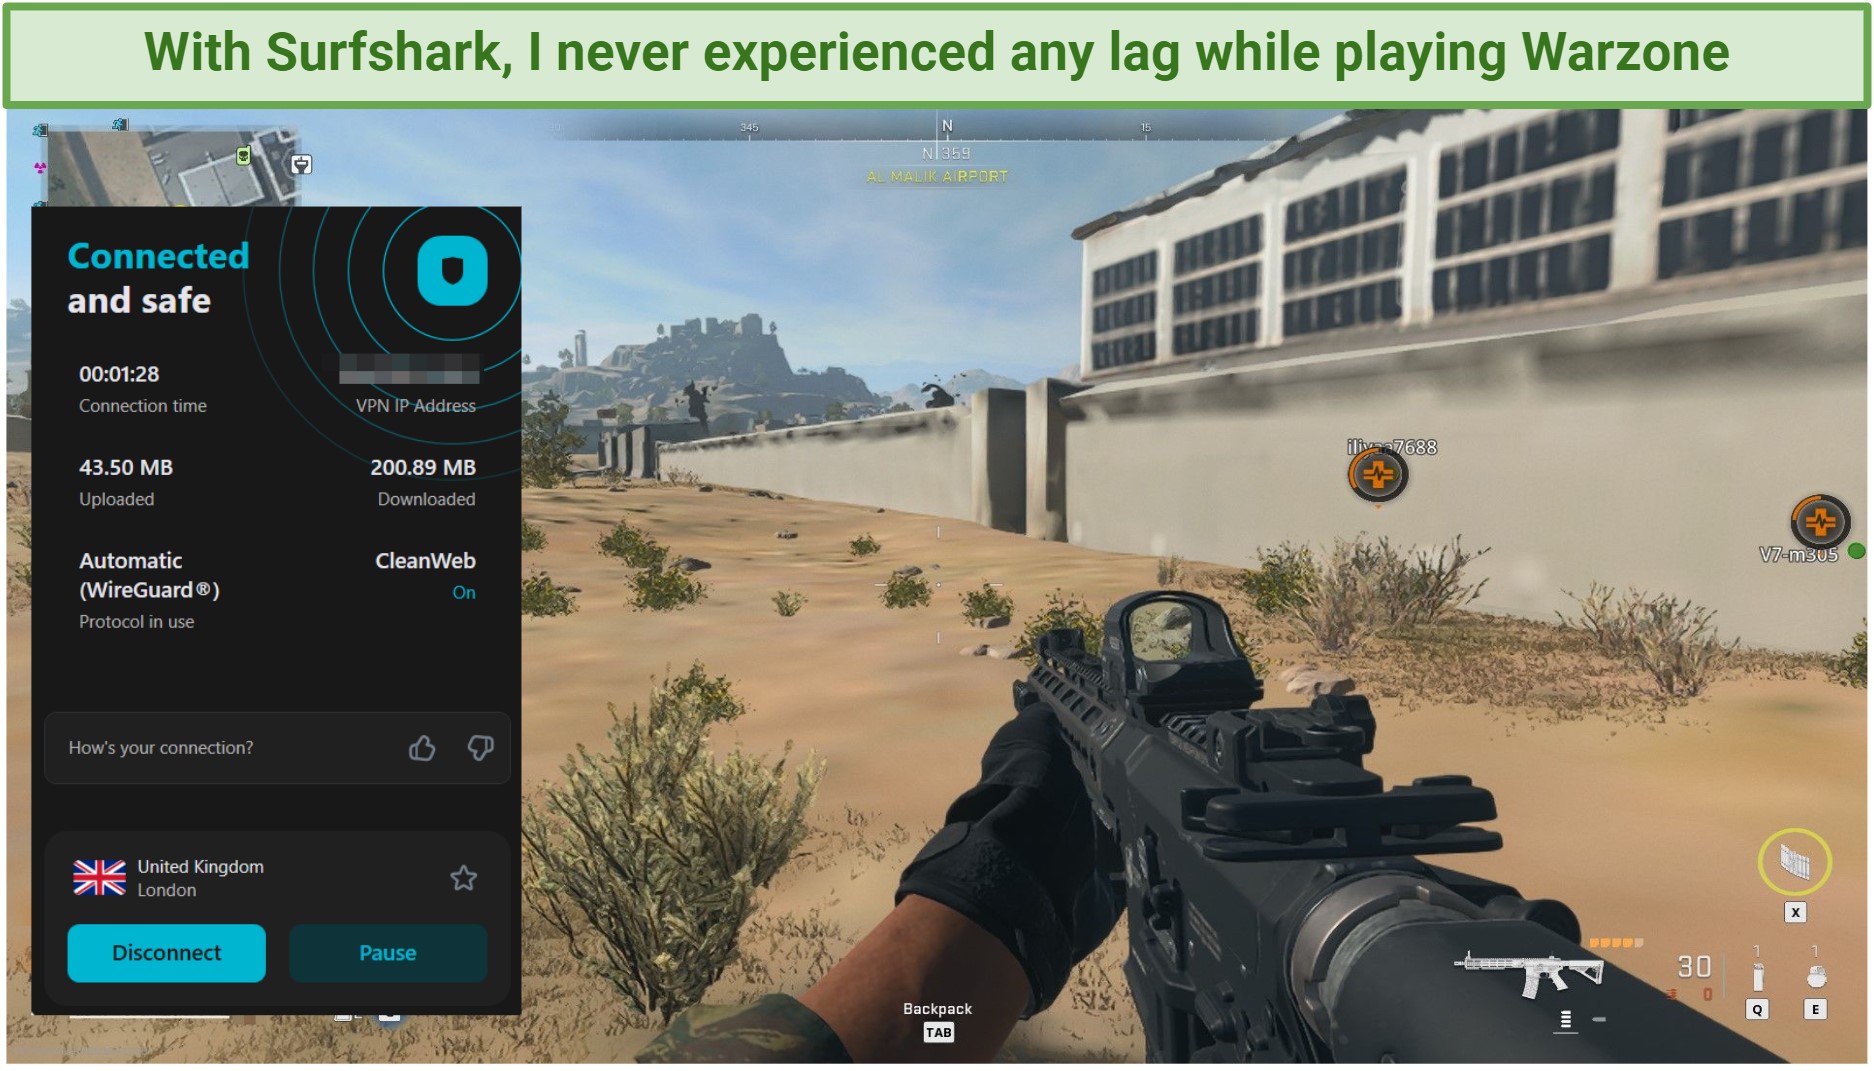 Screenshot of Warzone gameplay with Surfshark connected